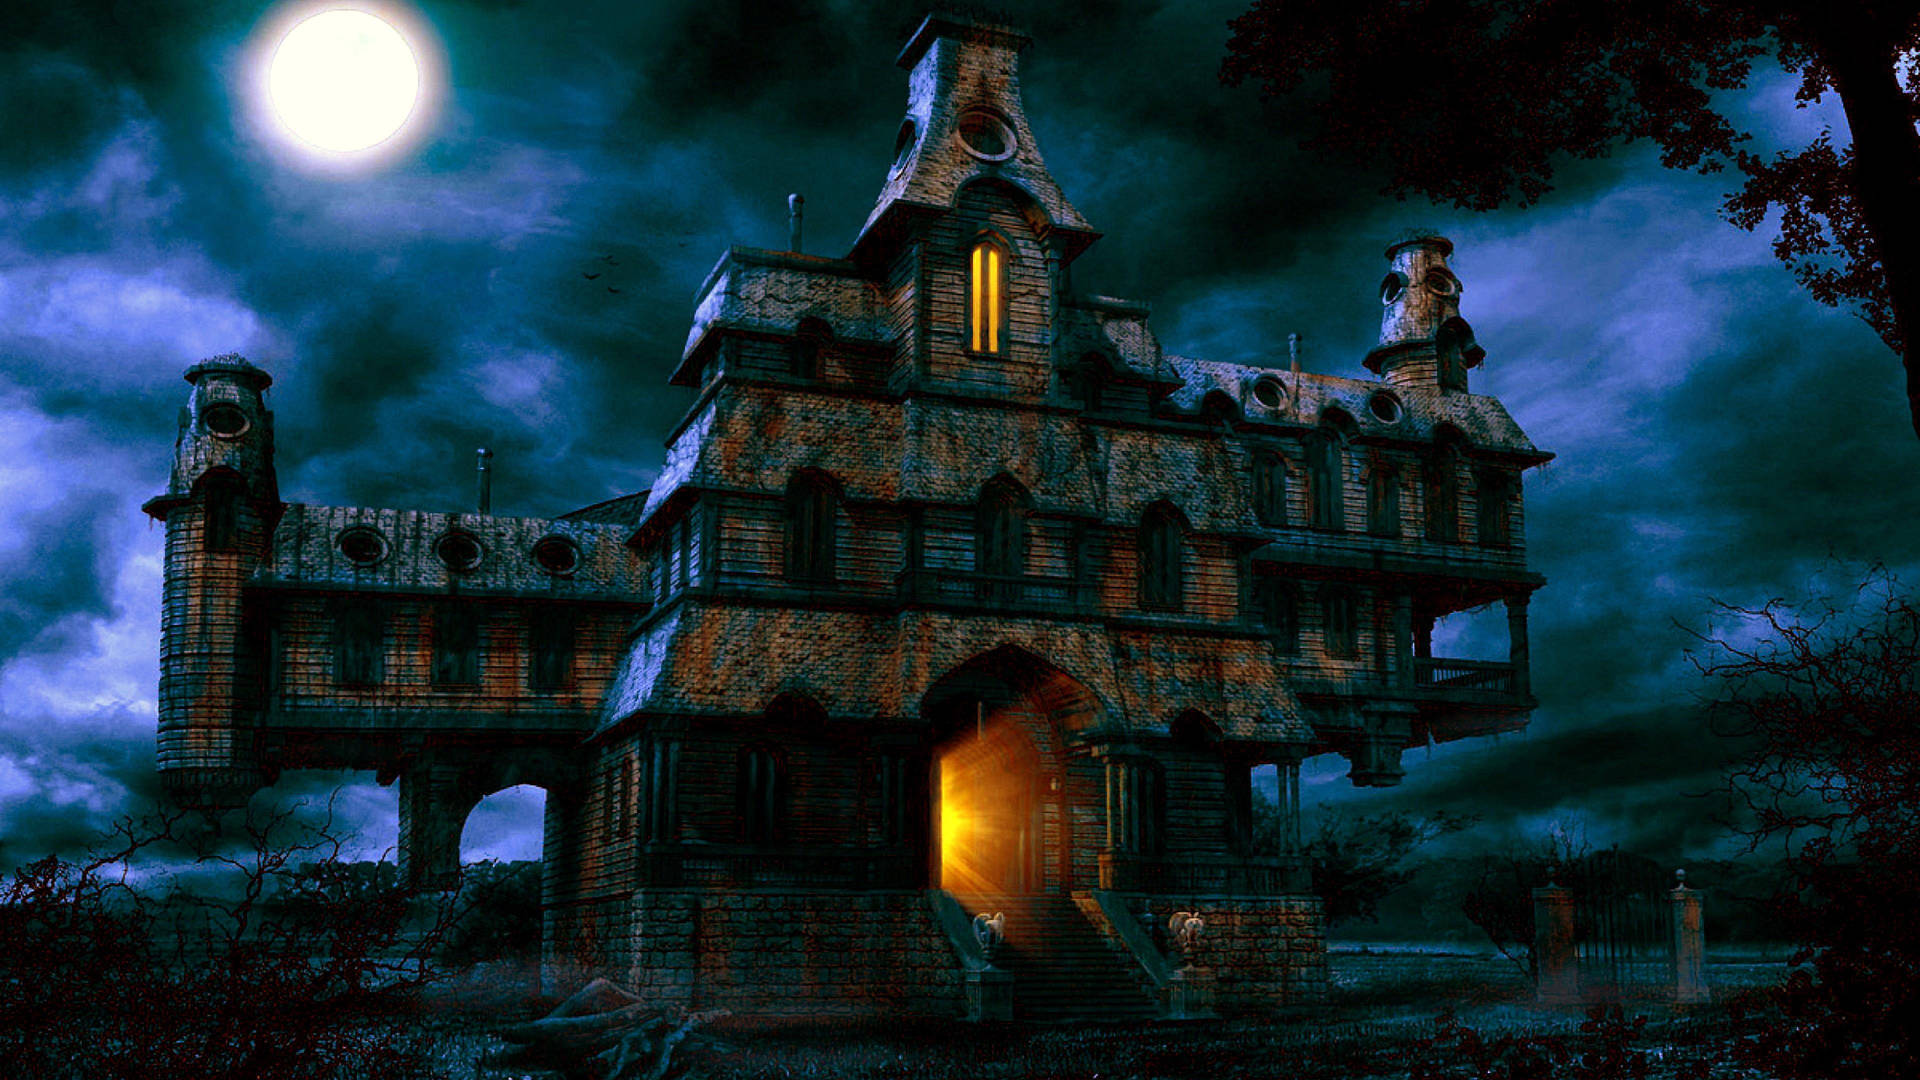 Get ready for a spooky night – visit a Haunted House this Halloween! Wallpaper